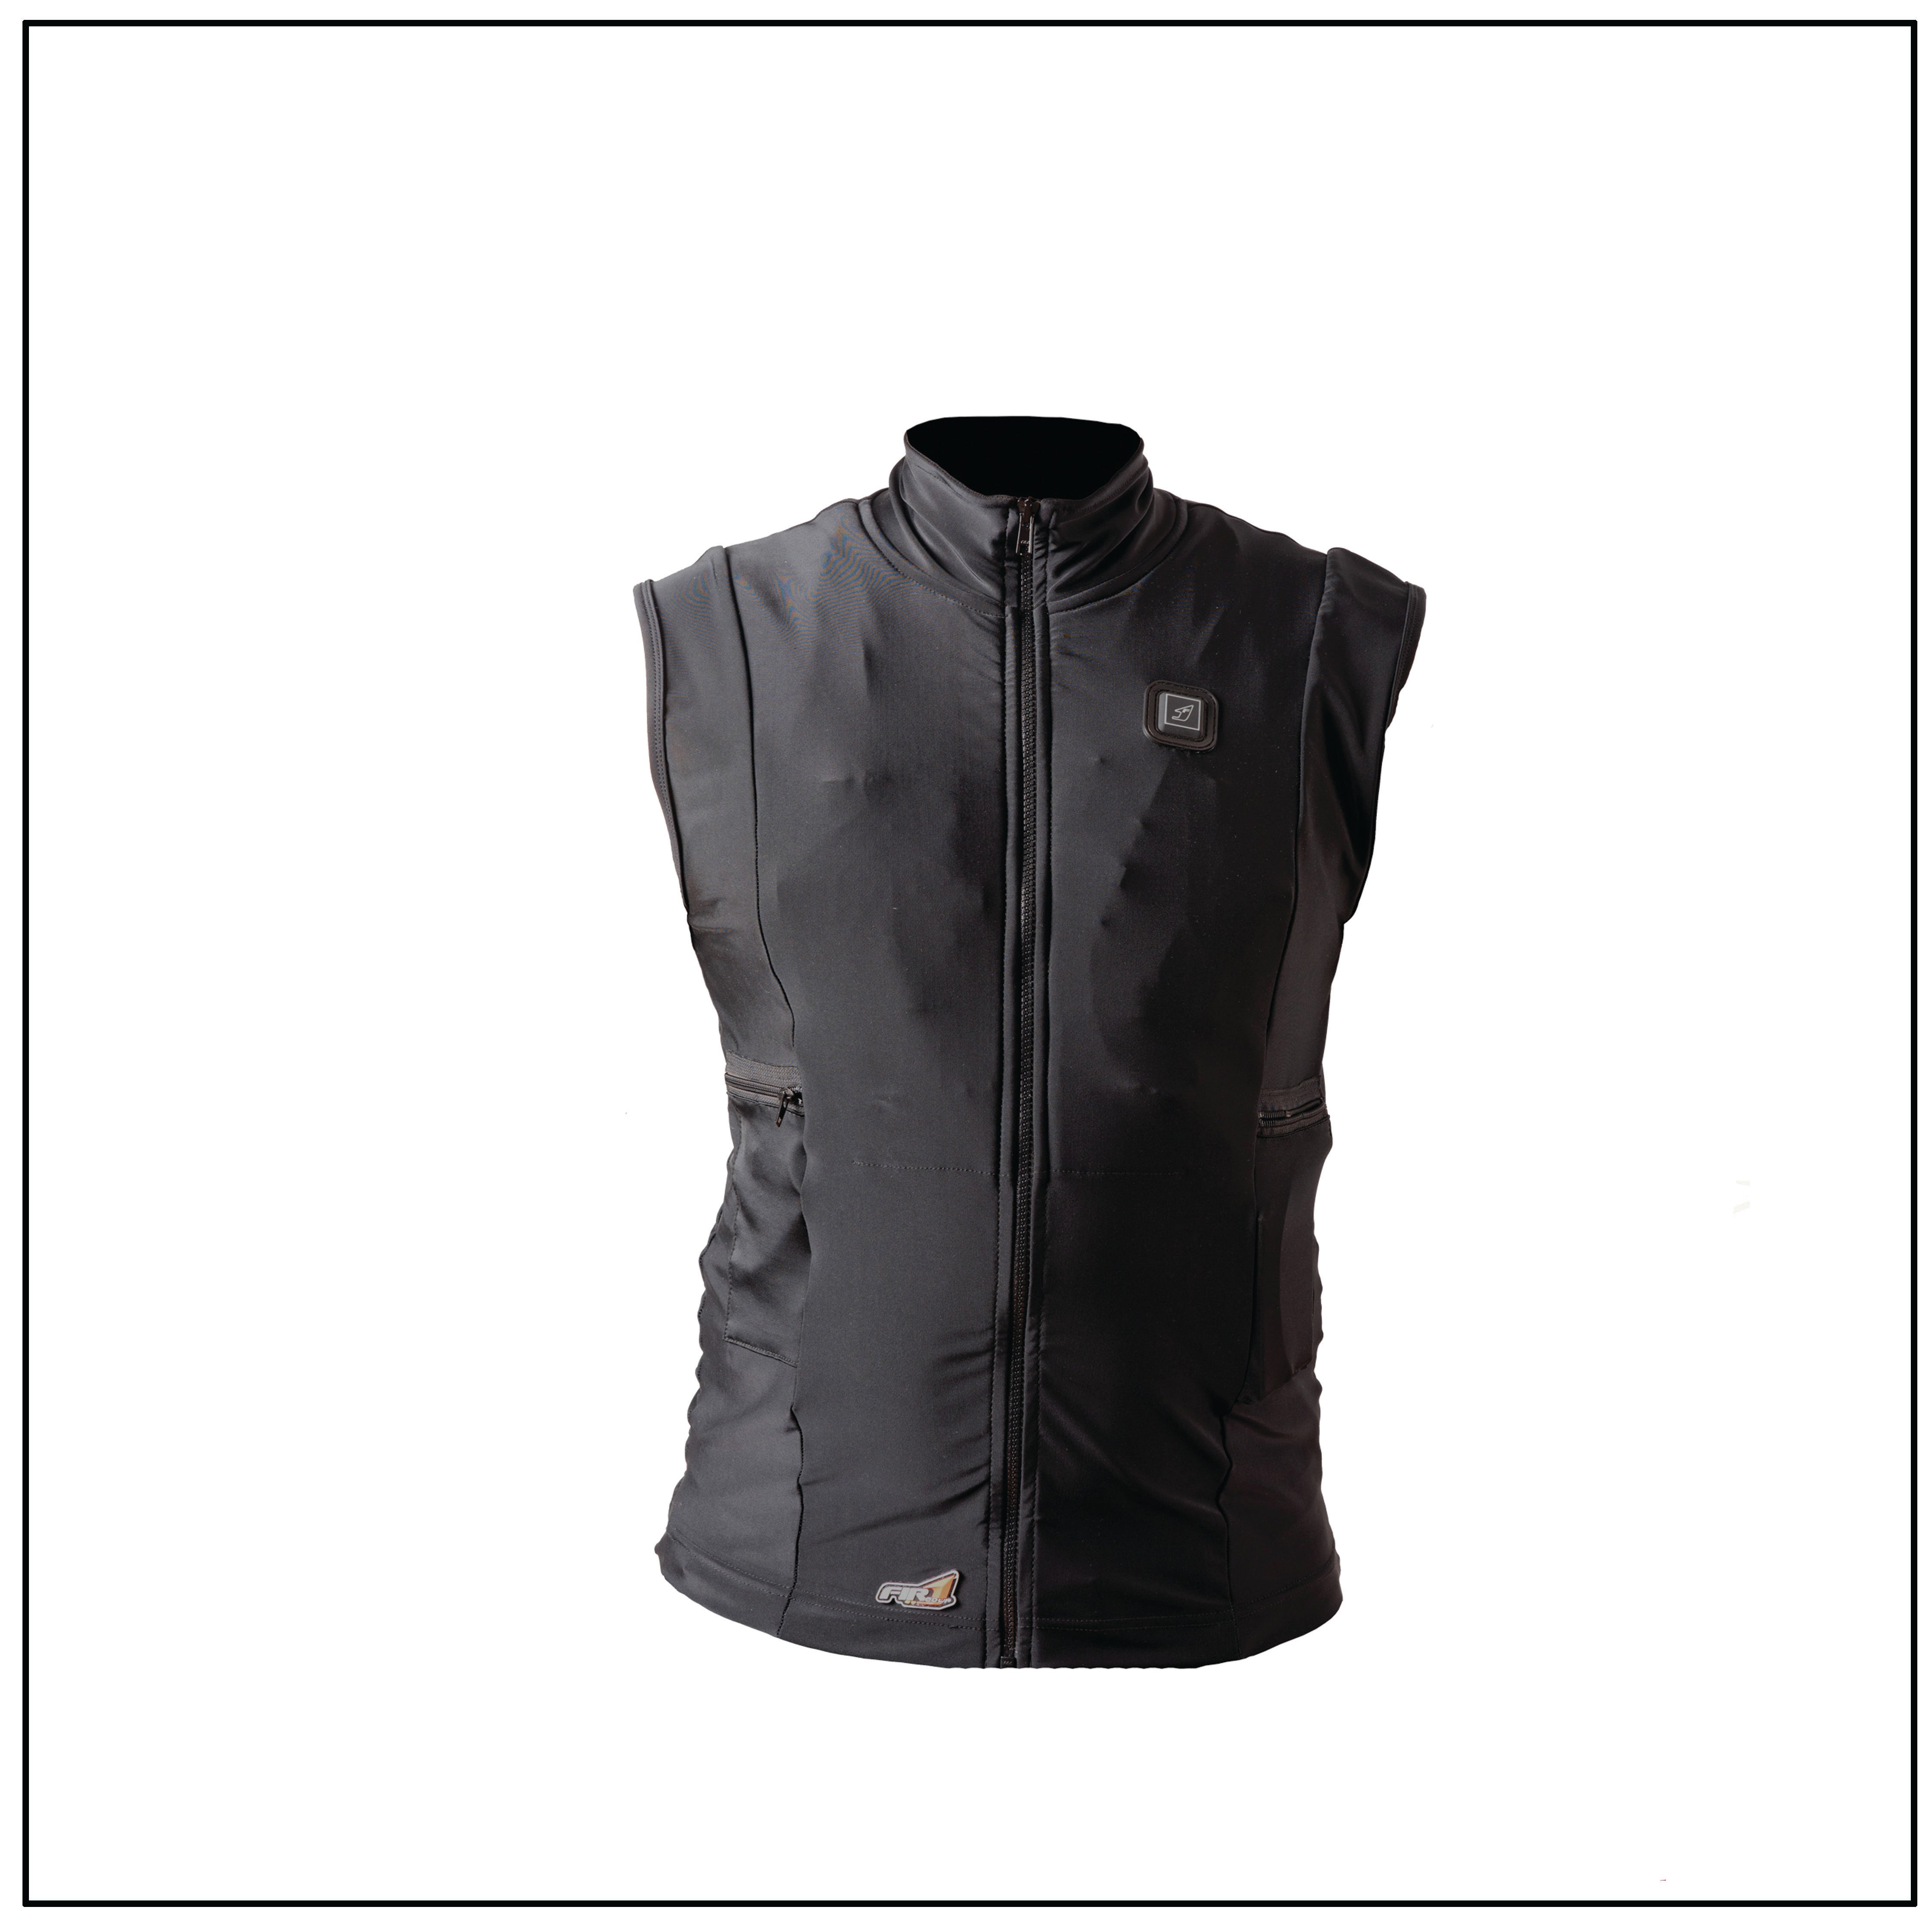 Refurbished Unisex Infrared Vest Liner with Temperature Control Application